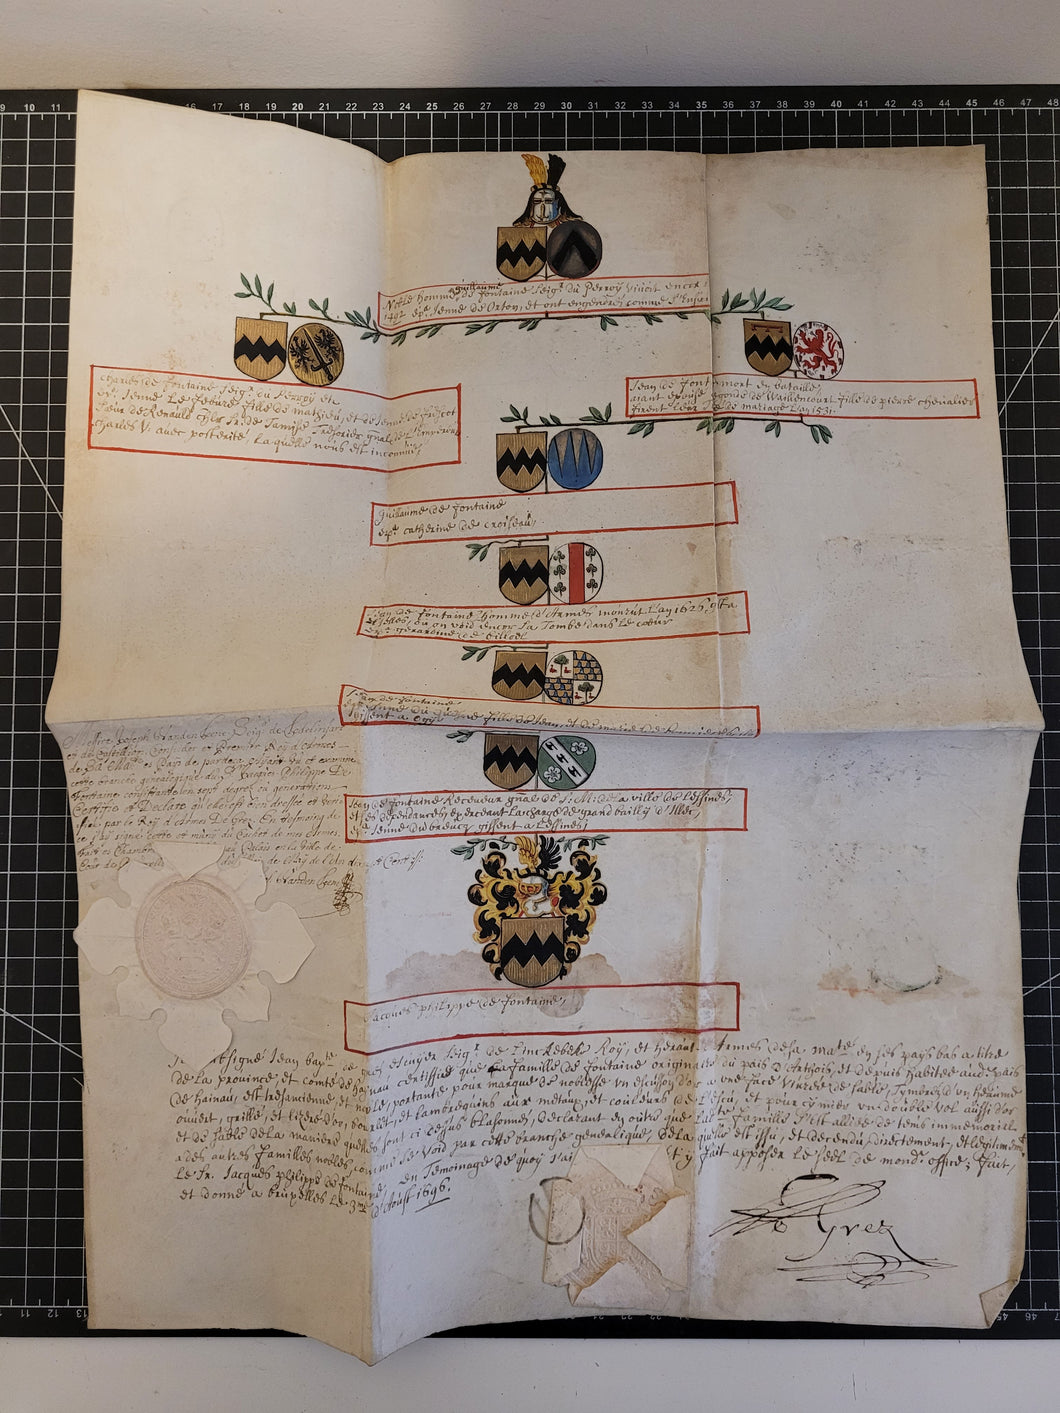 Genealogical Family Tree for Guillaume de Fontaine, Lord of Perroy, and his descendants. Illuminated Manuscript on Parchment, August 3 1696